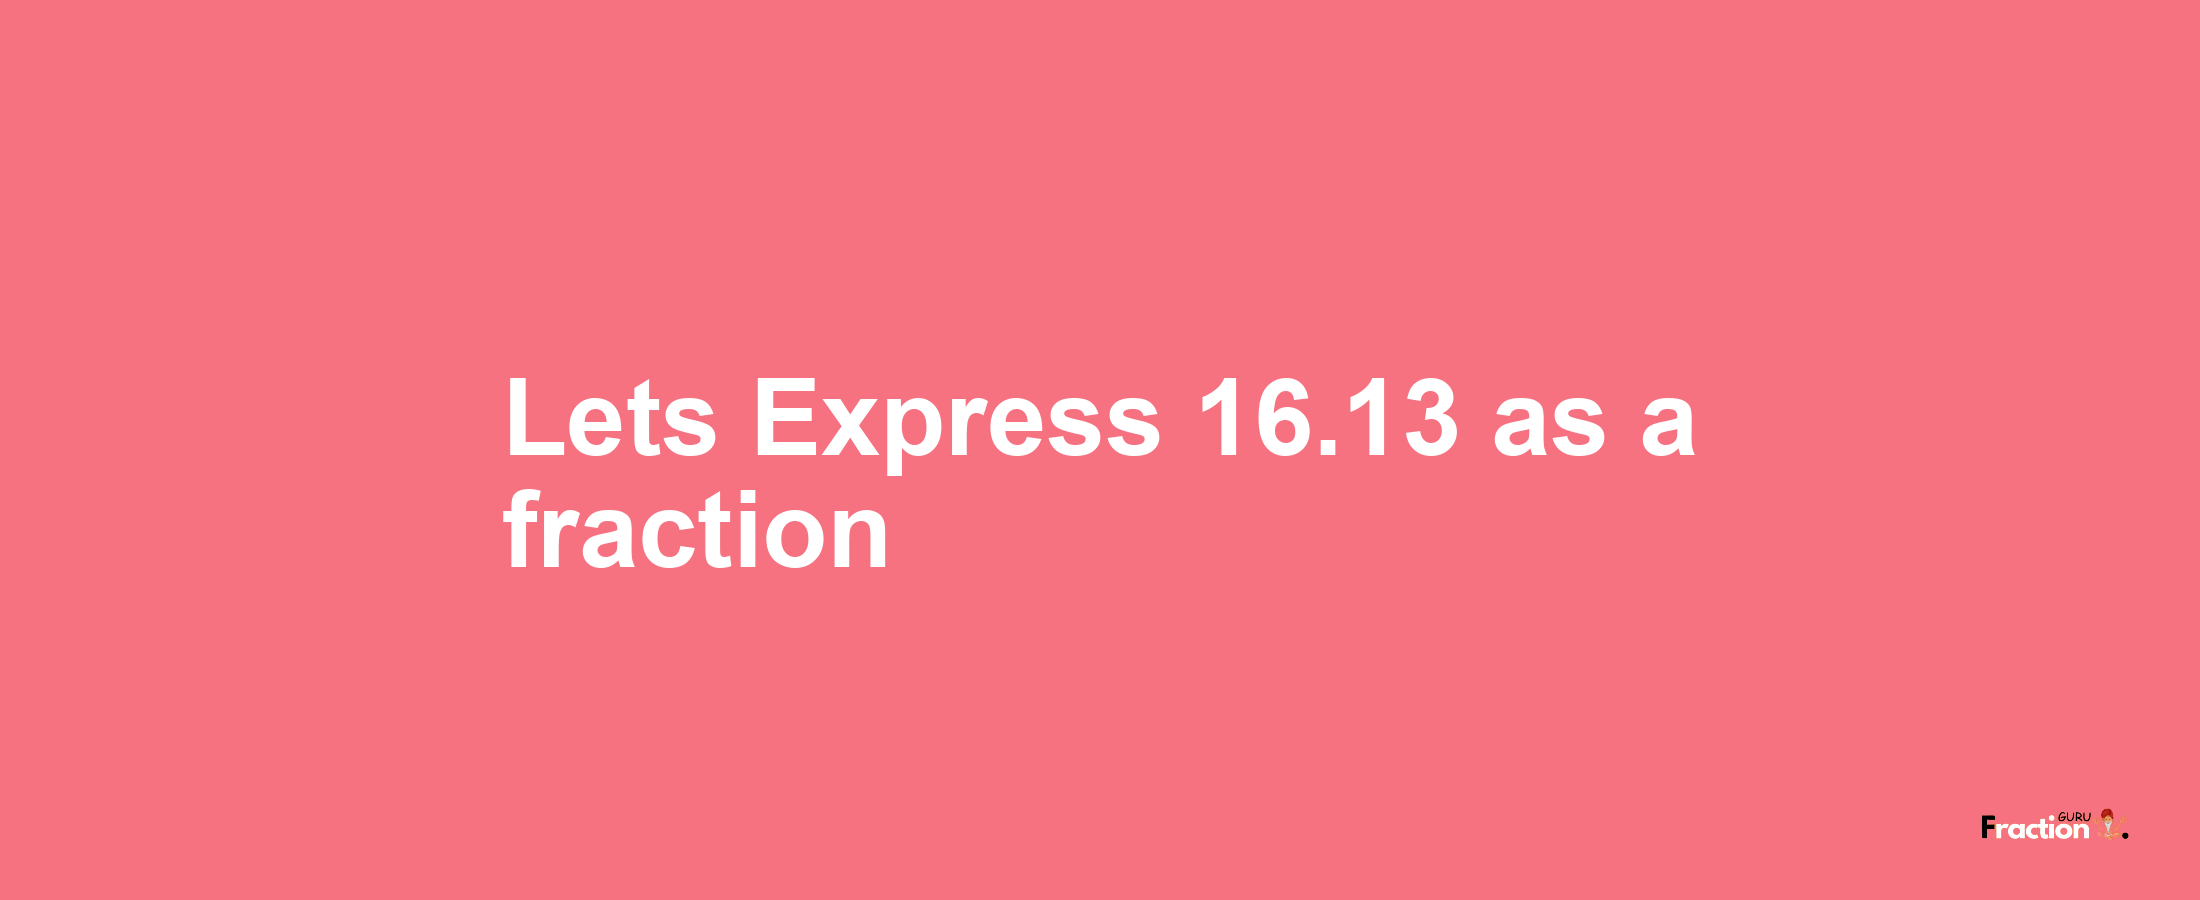 Lets Express 16.13 as afraction